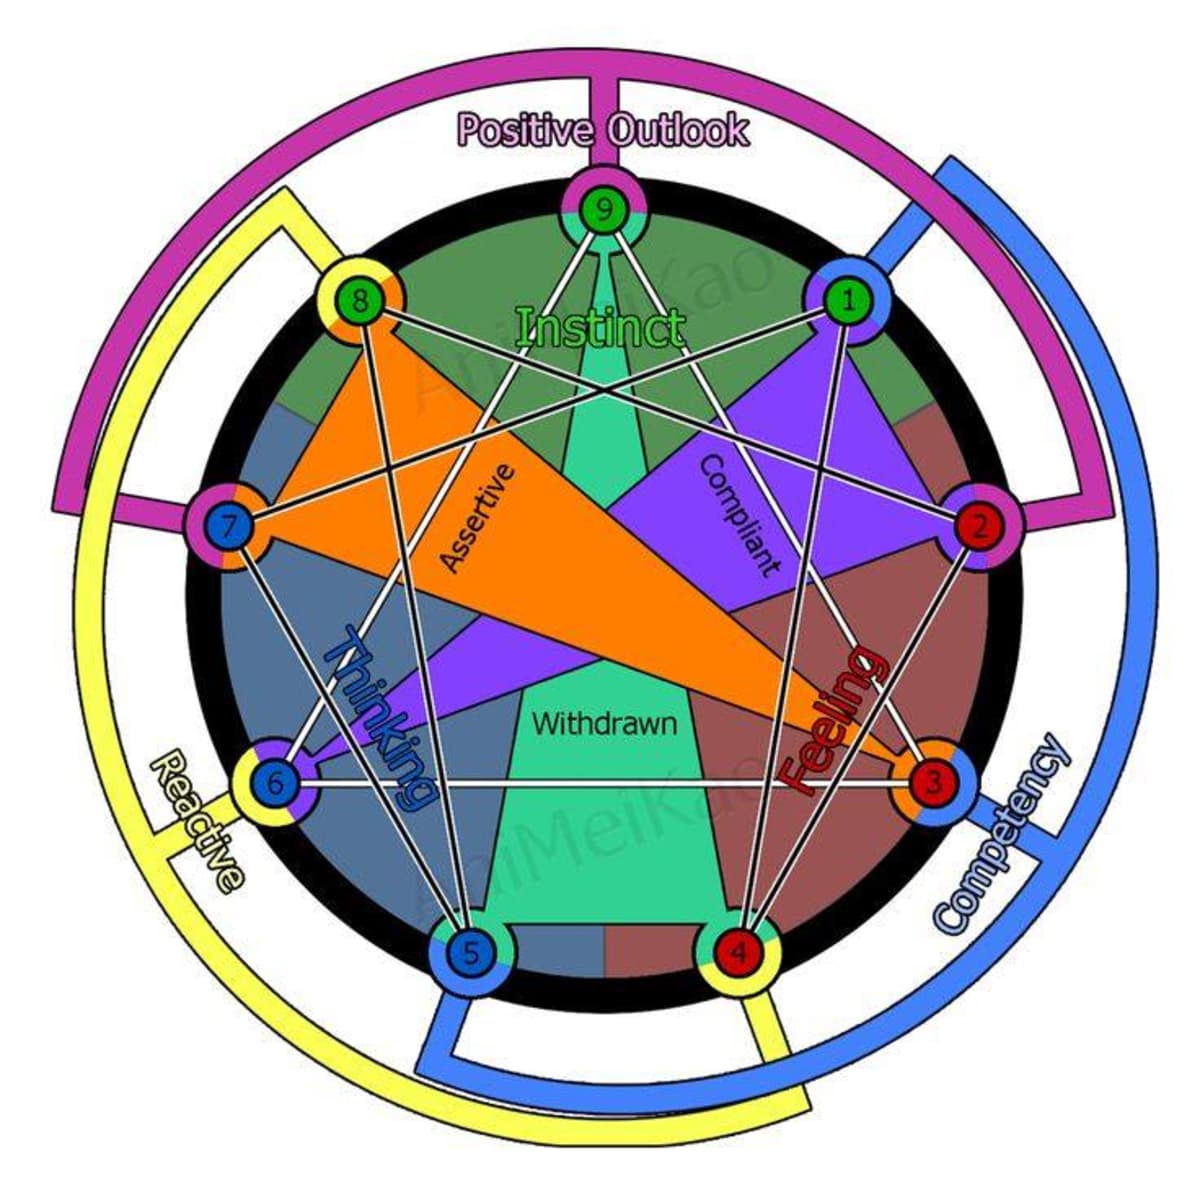 The Elements of Nature in the Enneagram : r/Enneagram